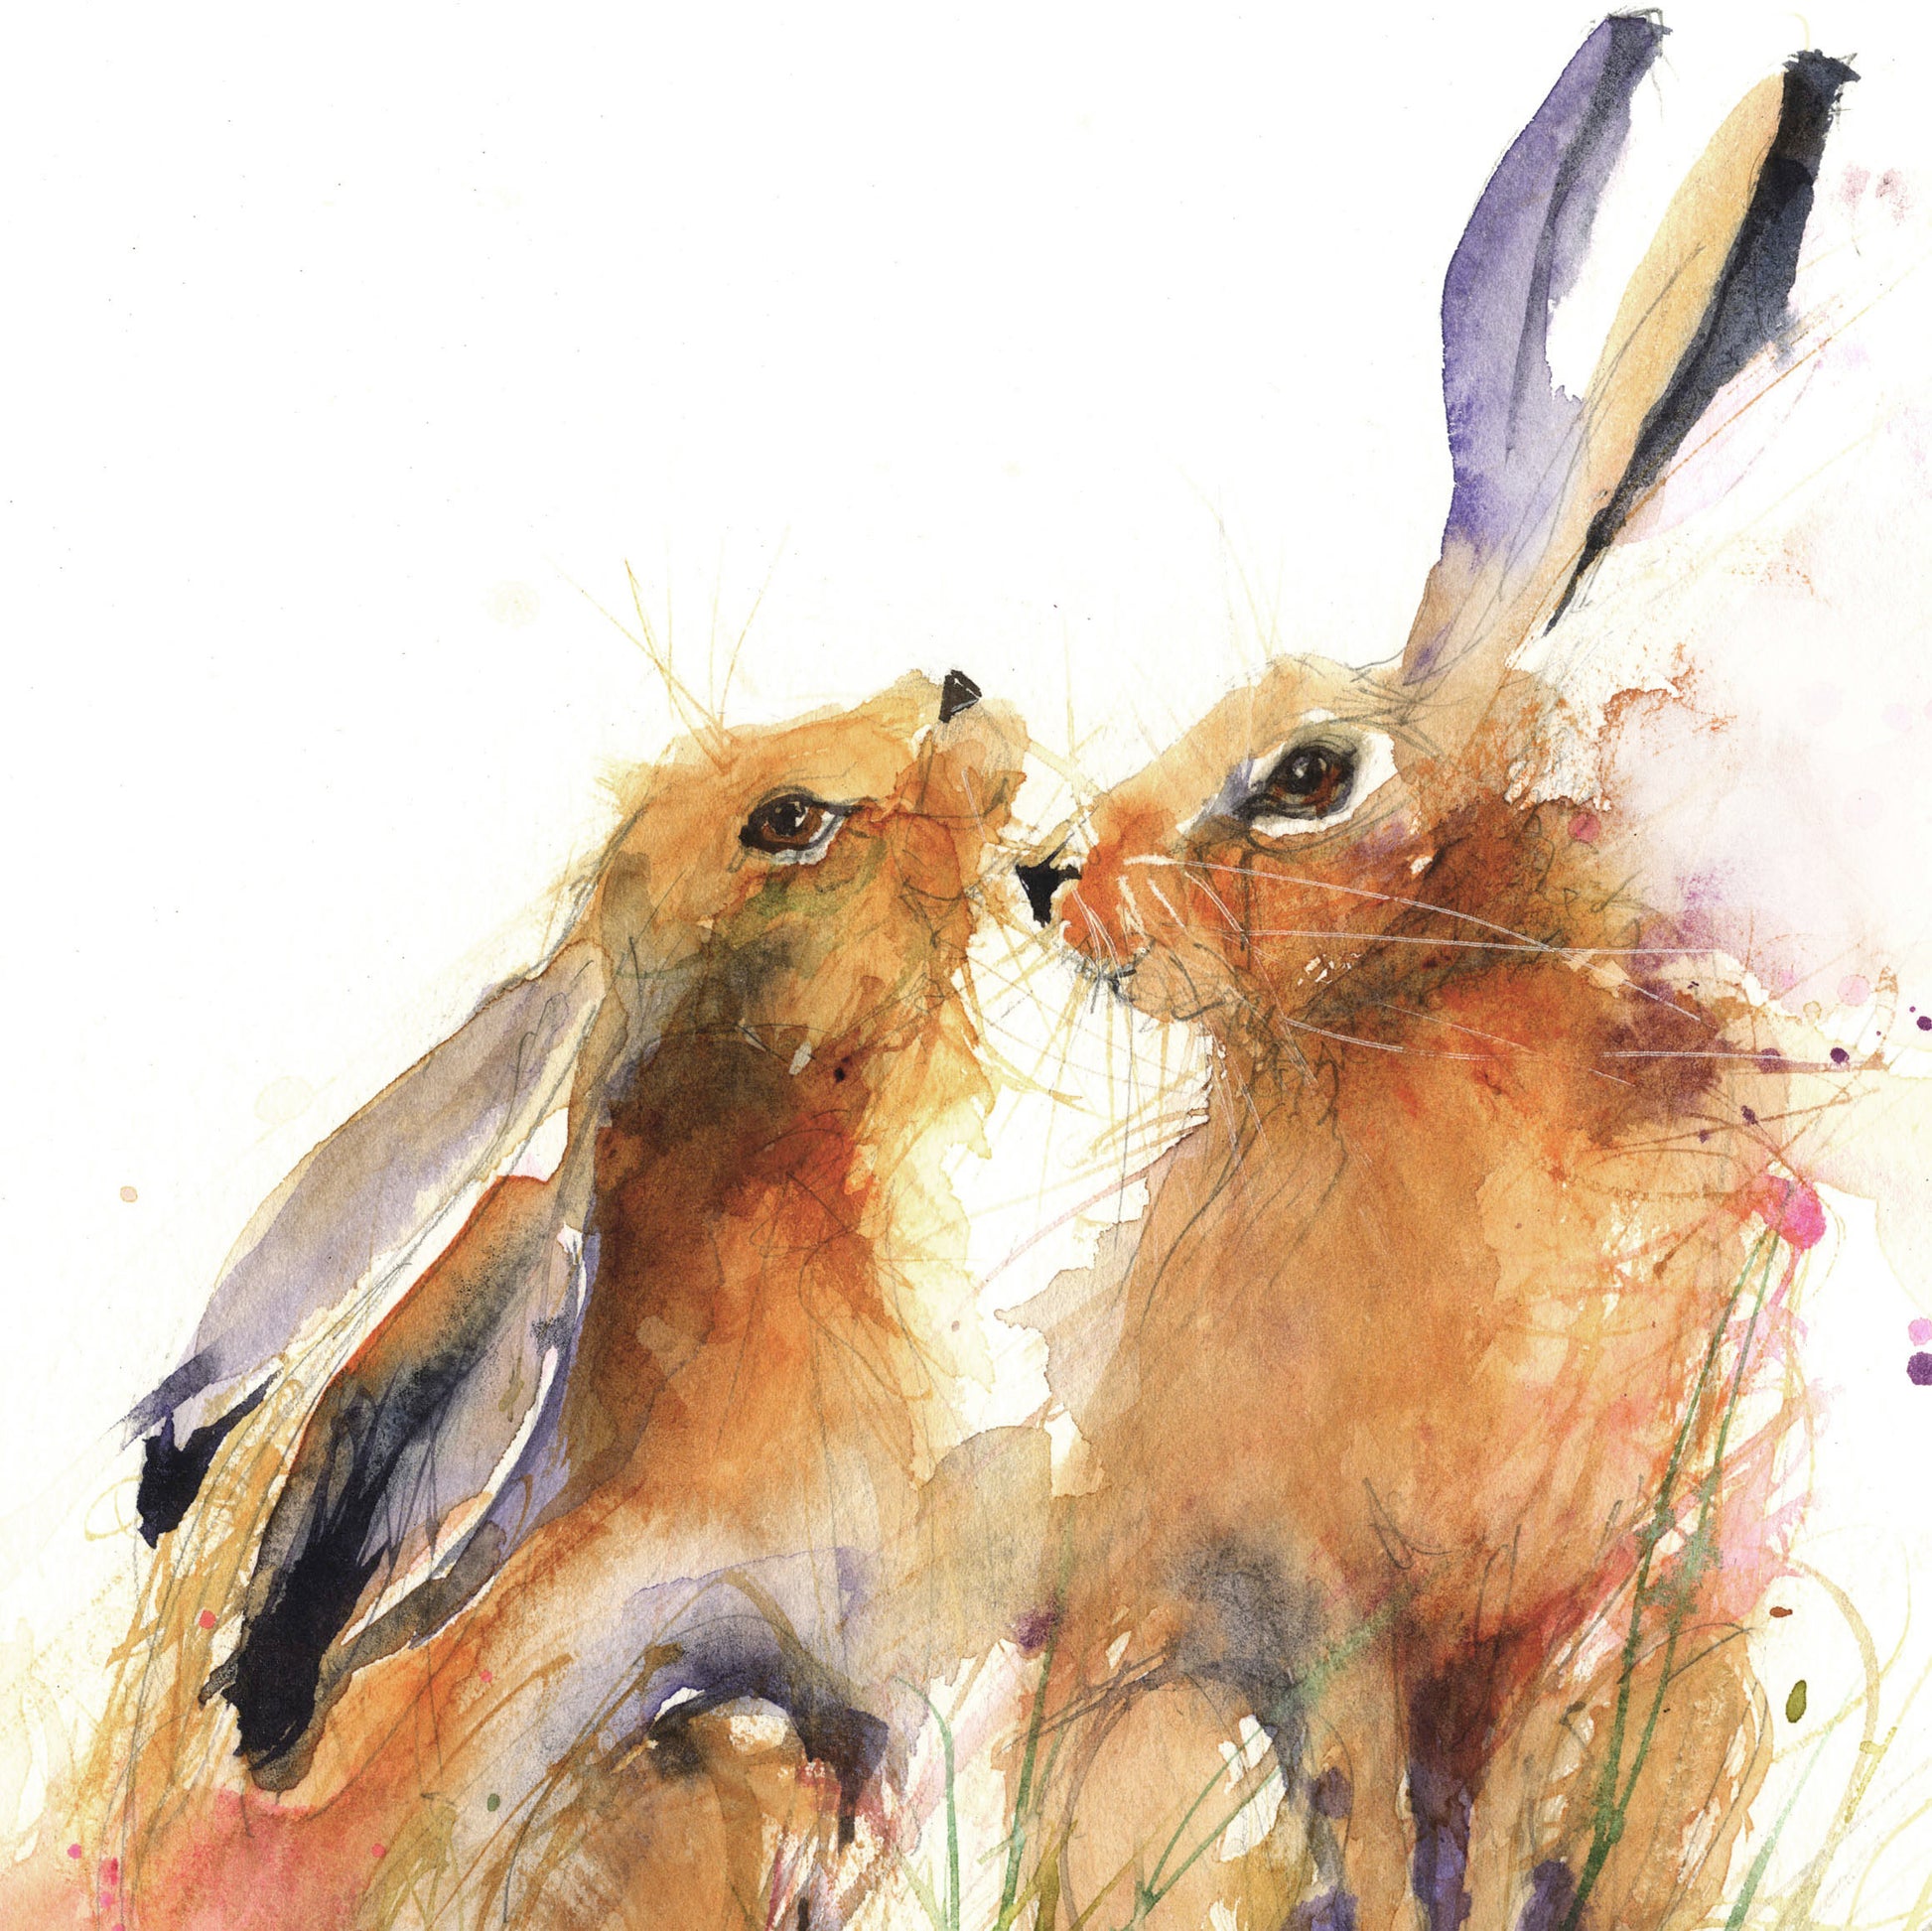 LIMITED EDITION PRINT snuggling hares - Jen Buckley Art limited edition animal art prints